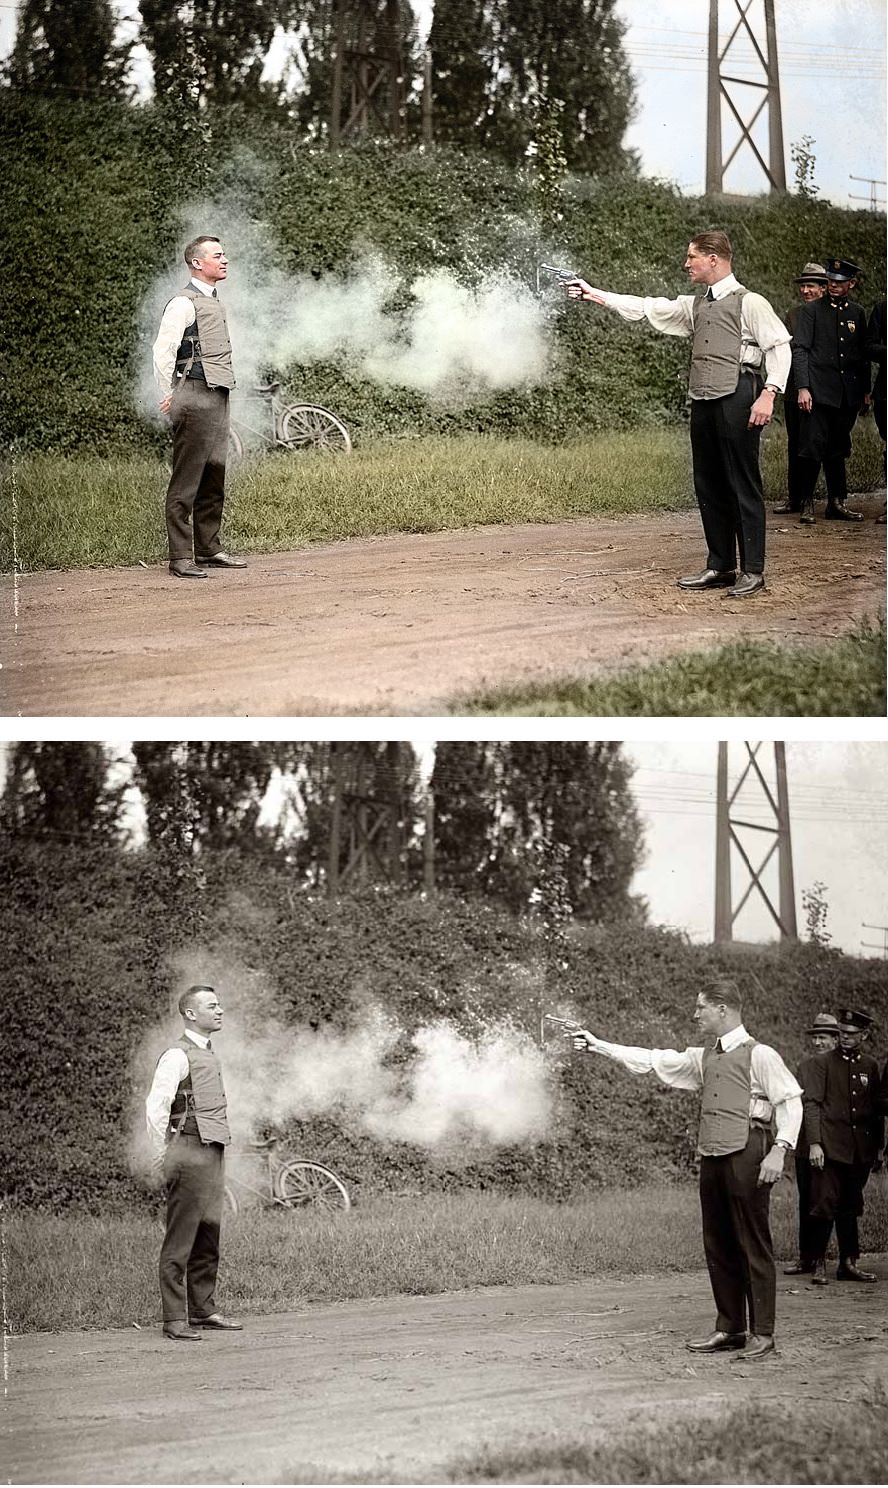 W.H. Murphy and his Associate Demonstrating their Bulletproof Vest on October 13, 1923